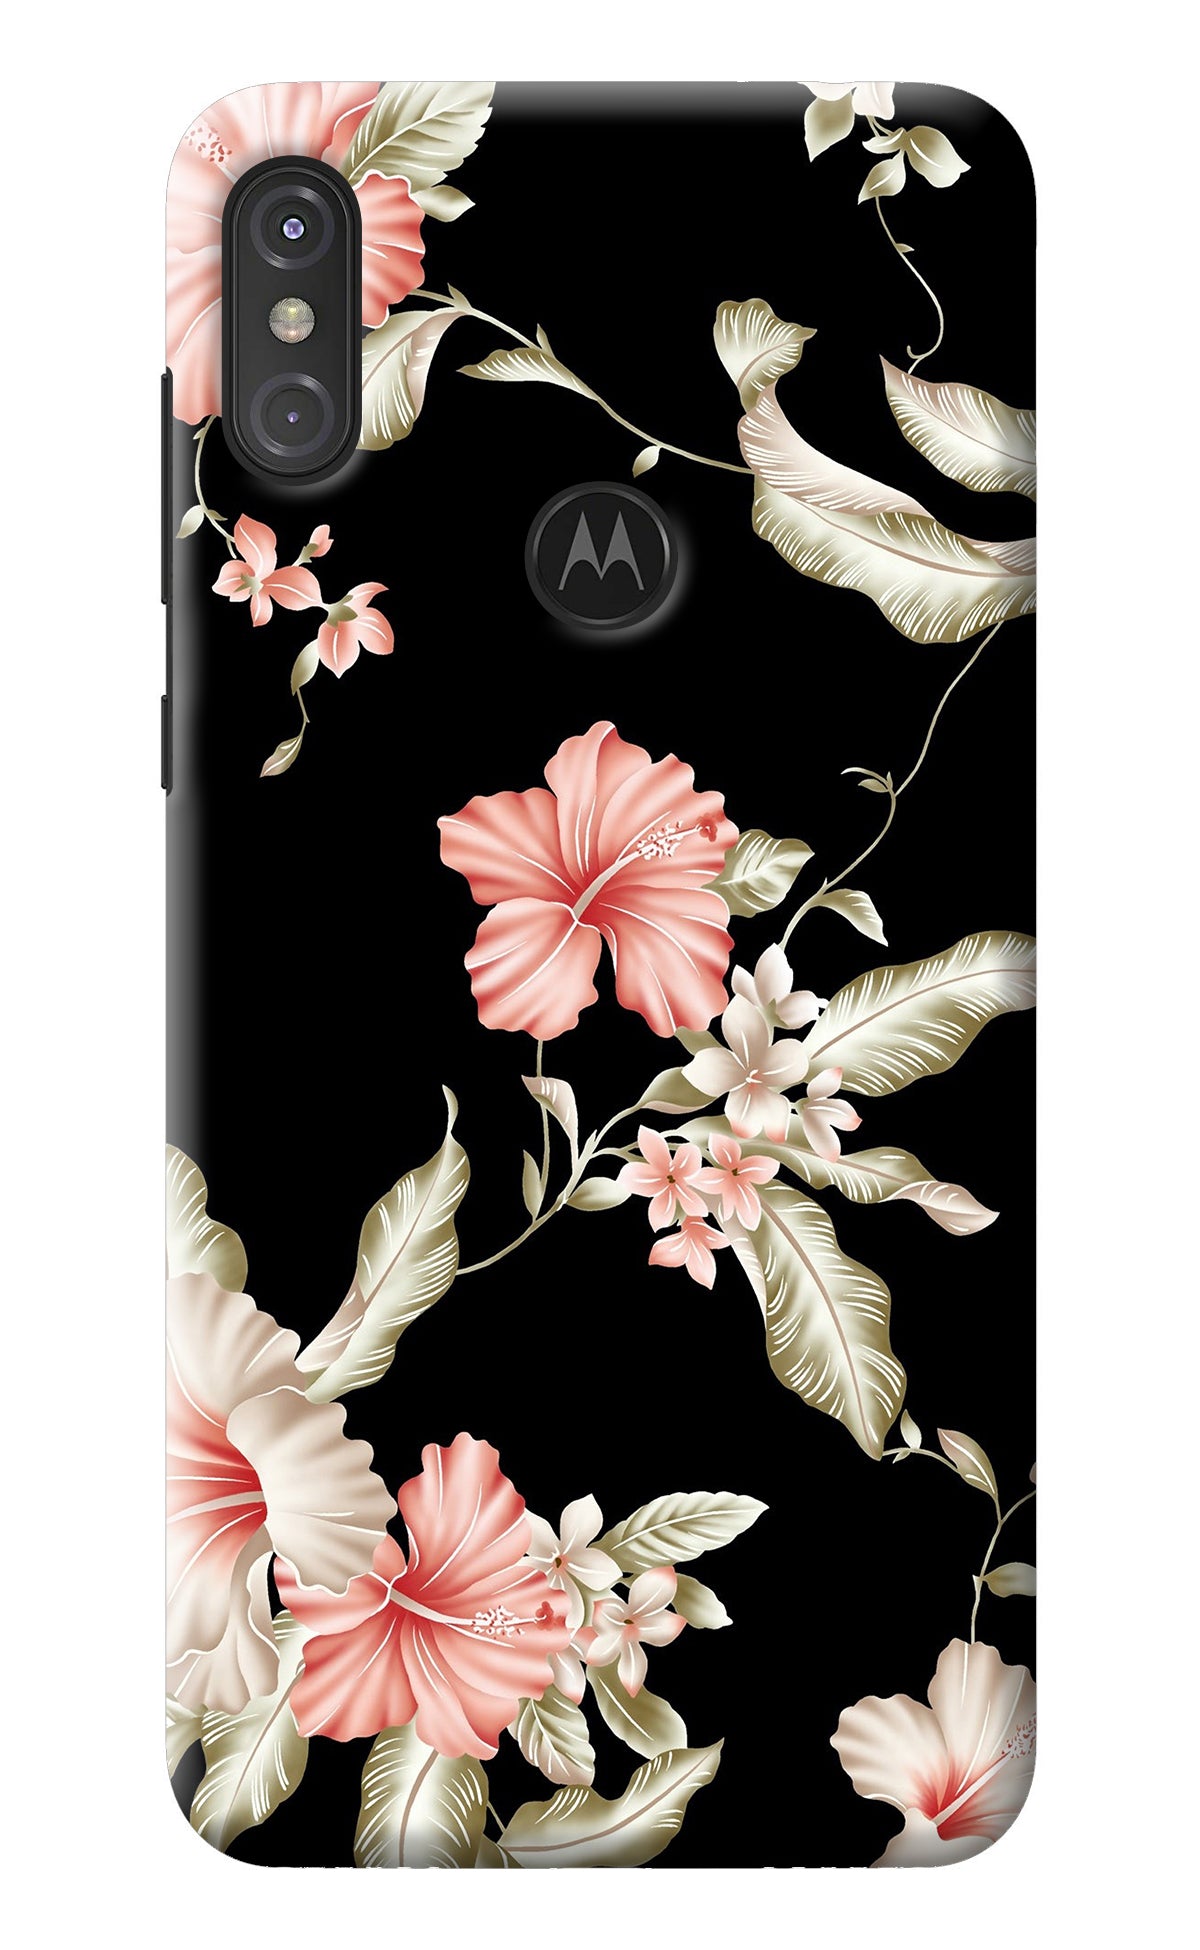 Flowers Moto One Power Back Cover